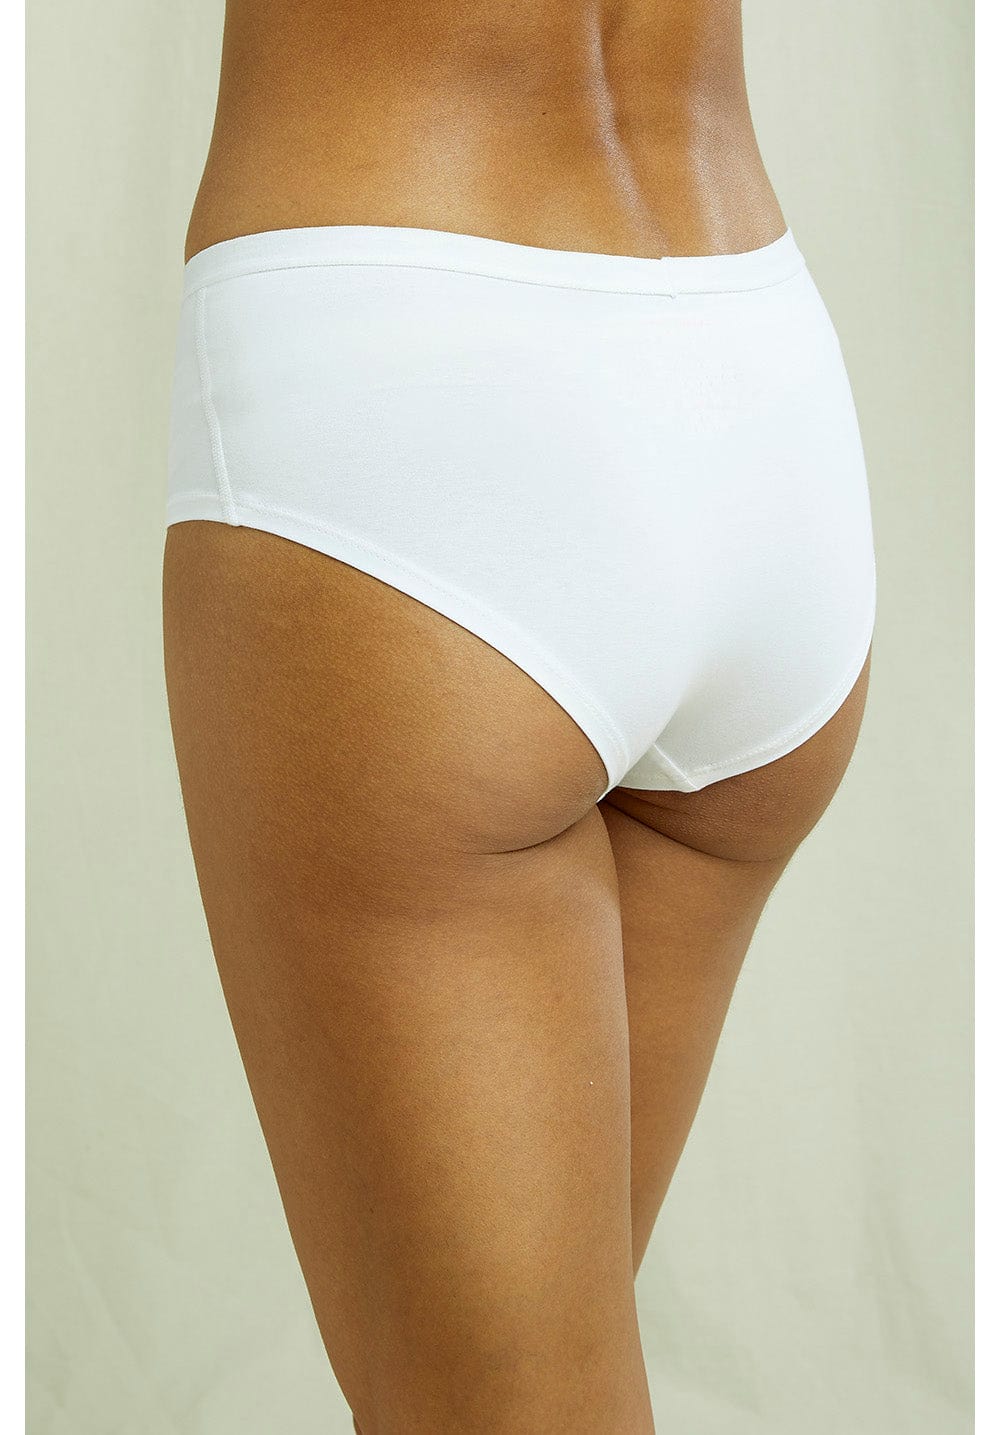 Womens - Organic Cotton Large Logo Hipster Briefs in White/fluro